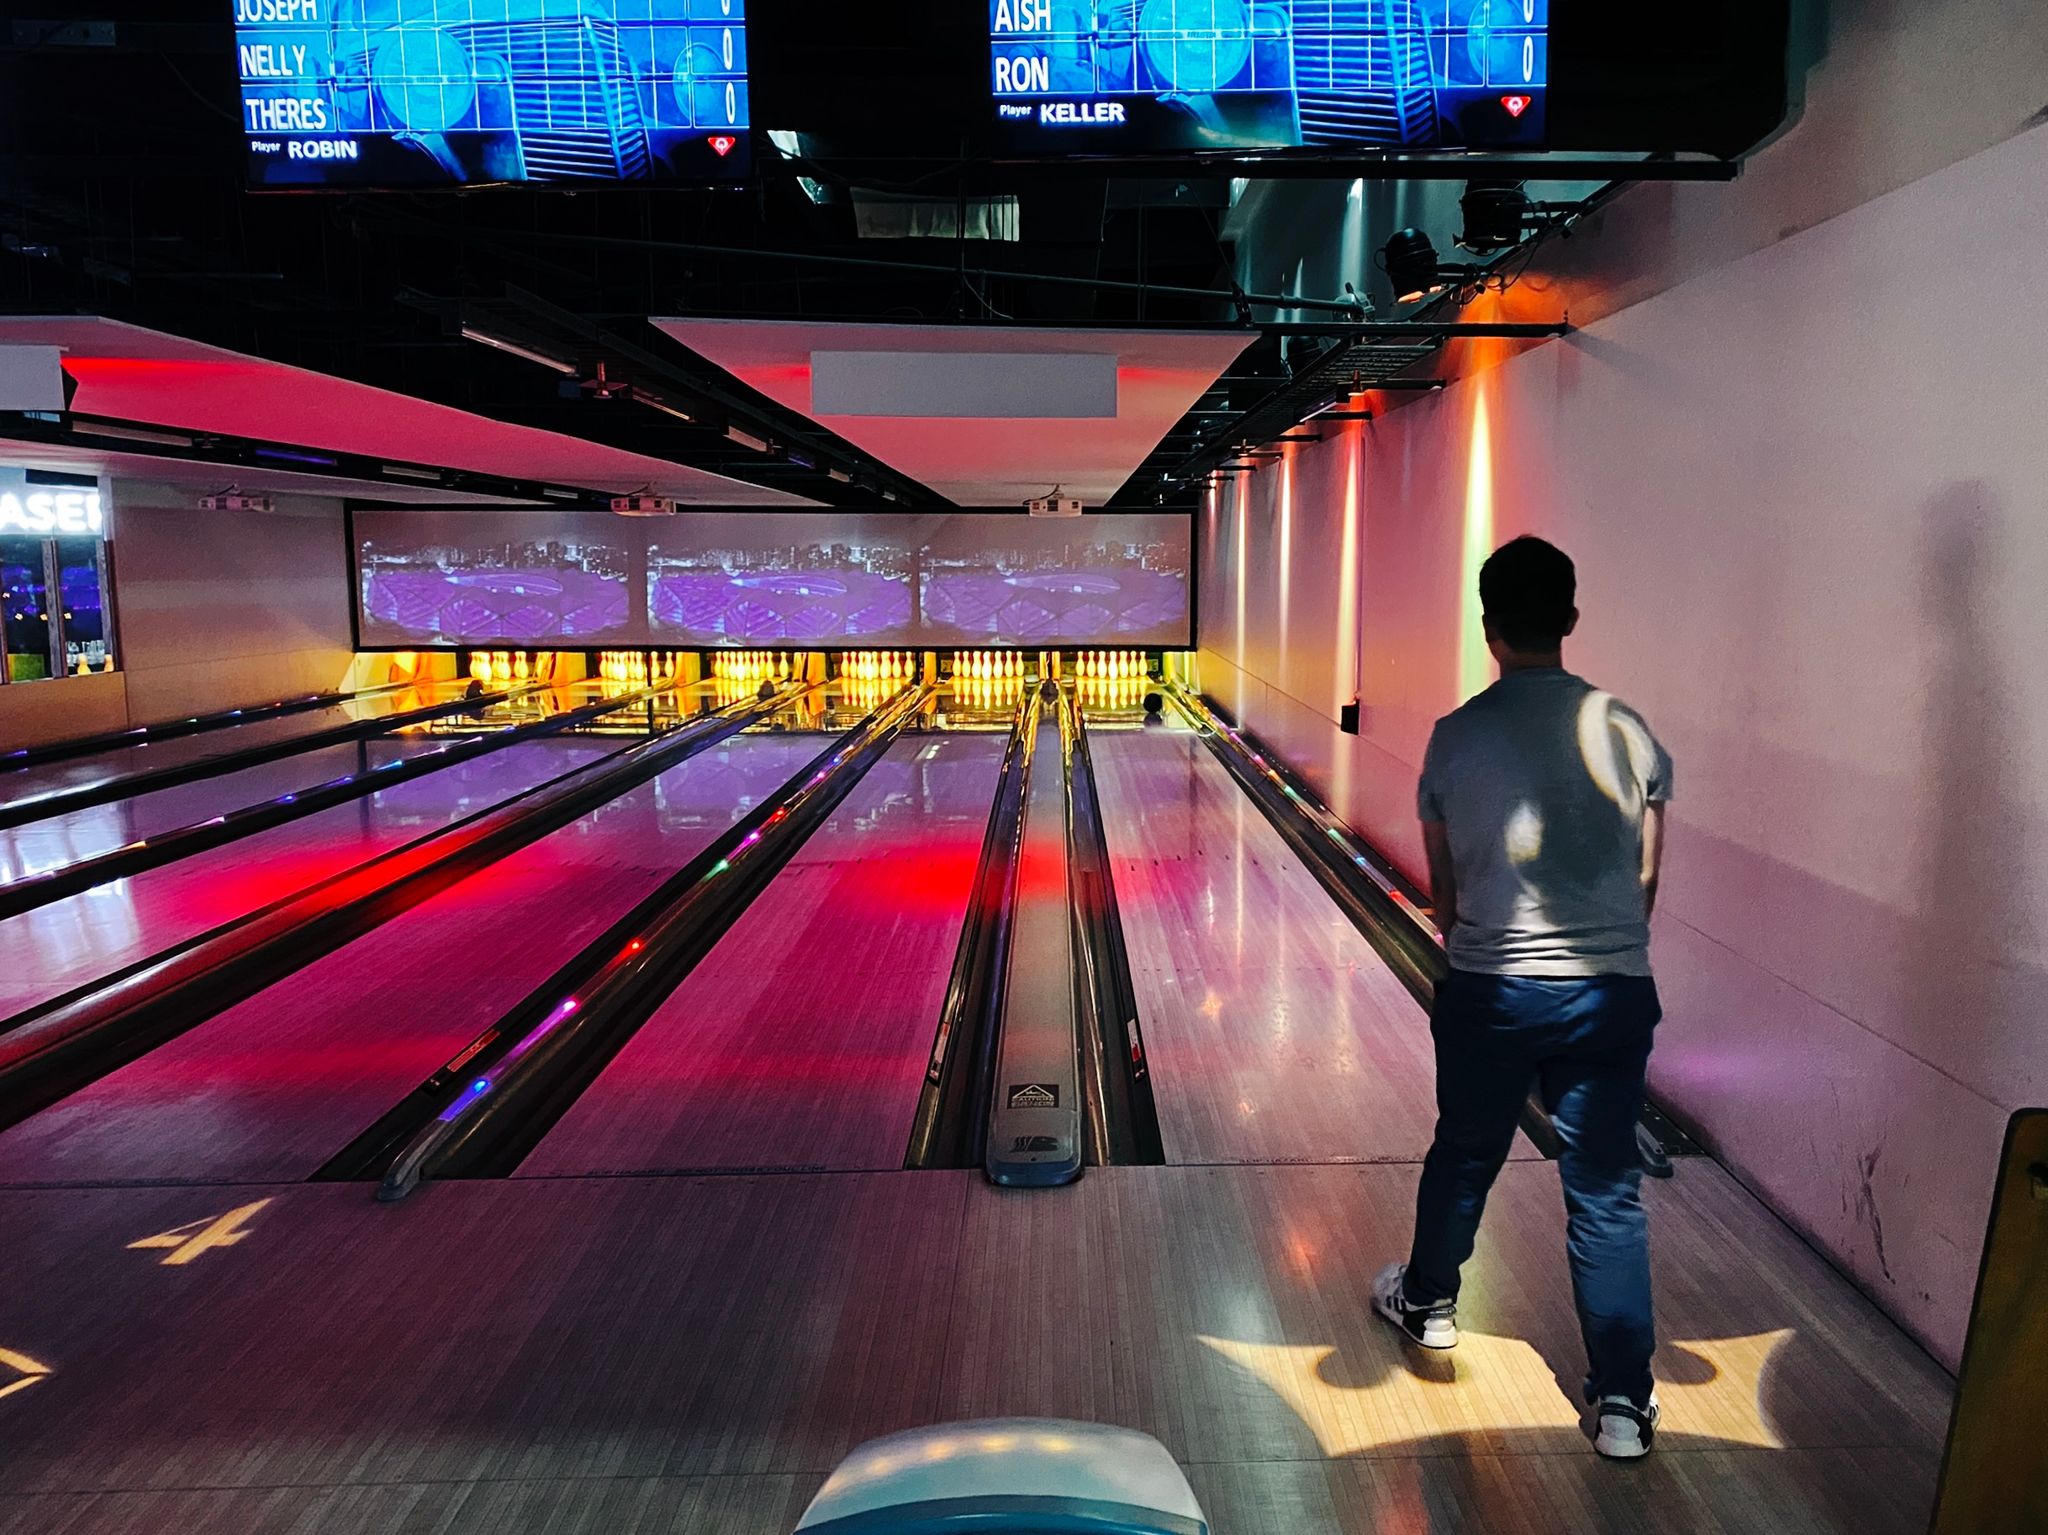 A photo of a neon-lot bowling alley.